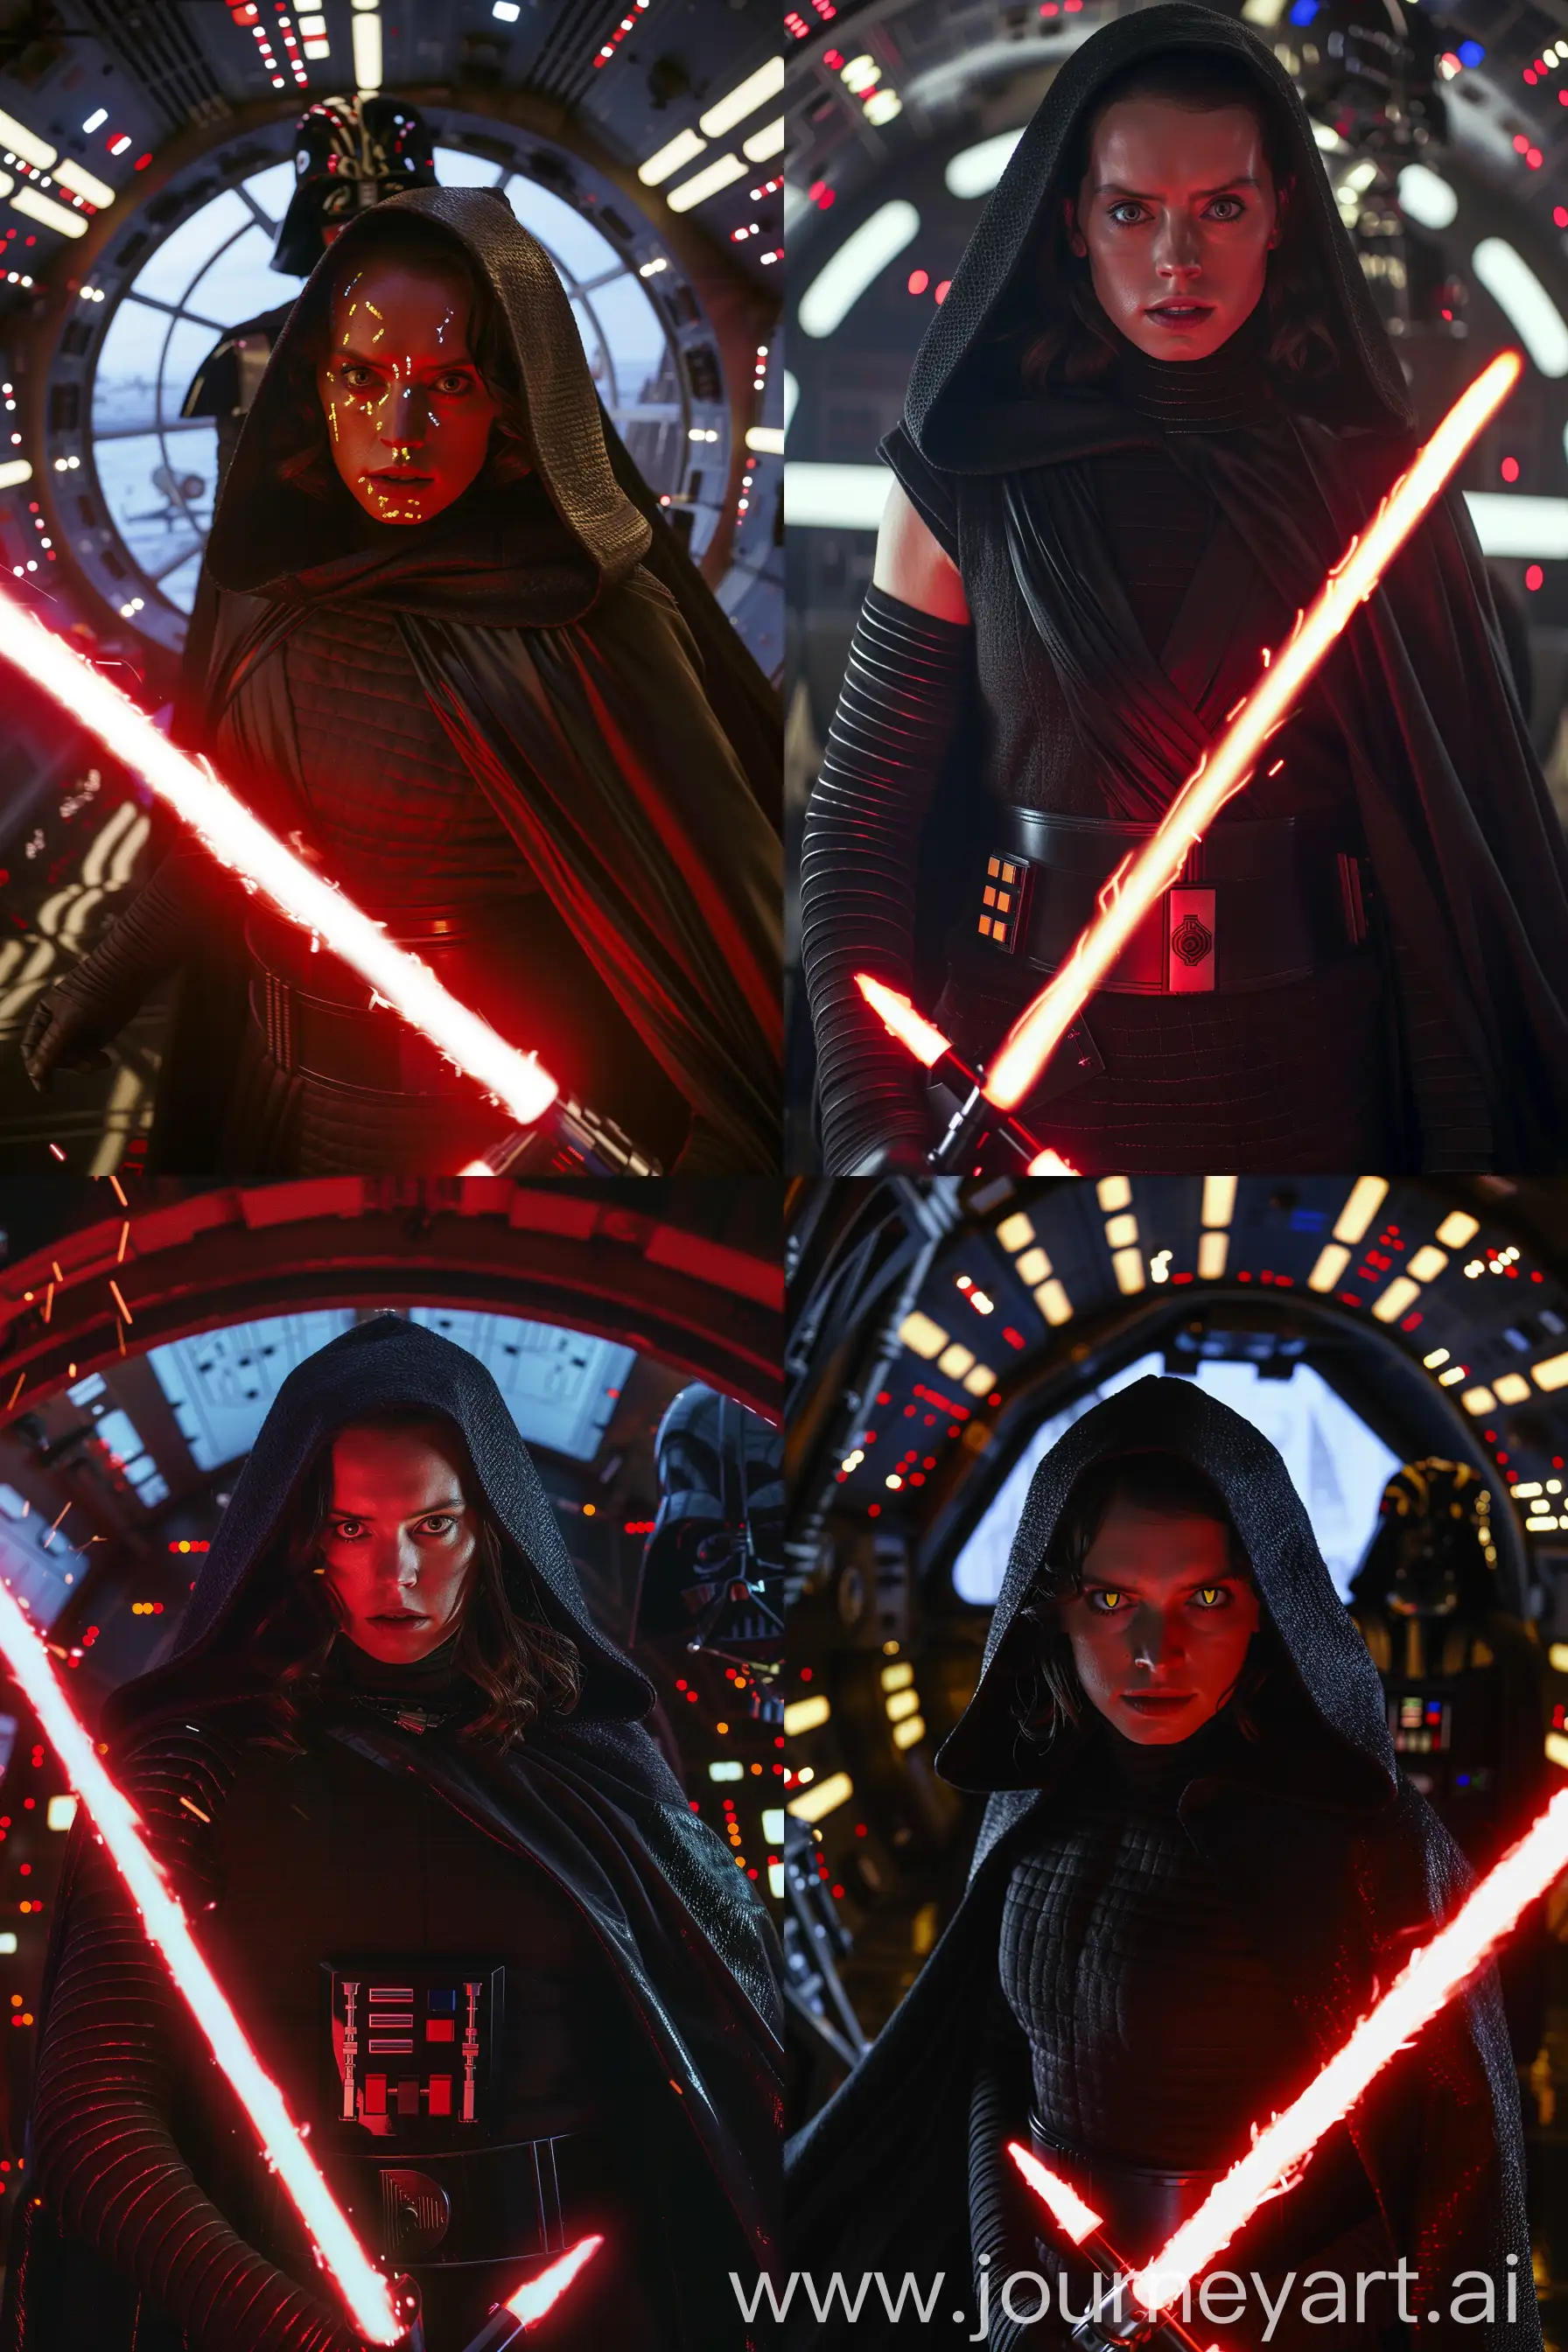 Epic-Cinematic-Still-Sith-Rey-Wielding-Red-DoubleBladed-Lightsaber-in-Darth-Vaders-Spaceship